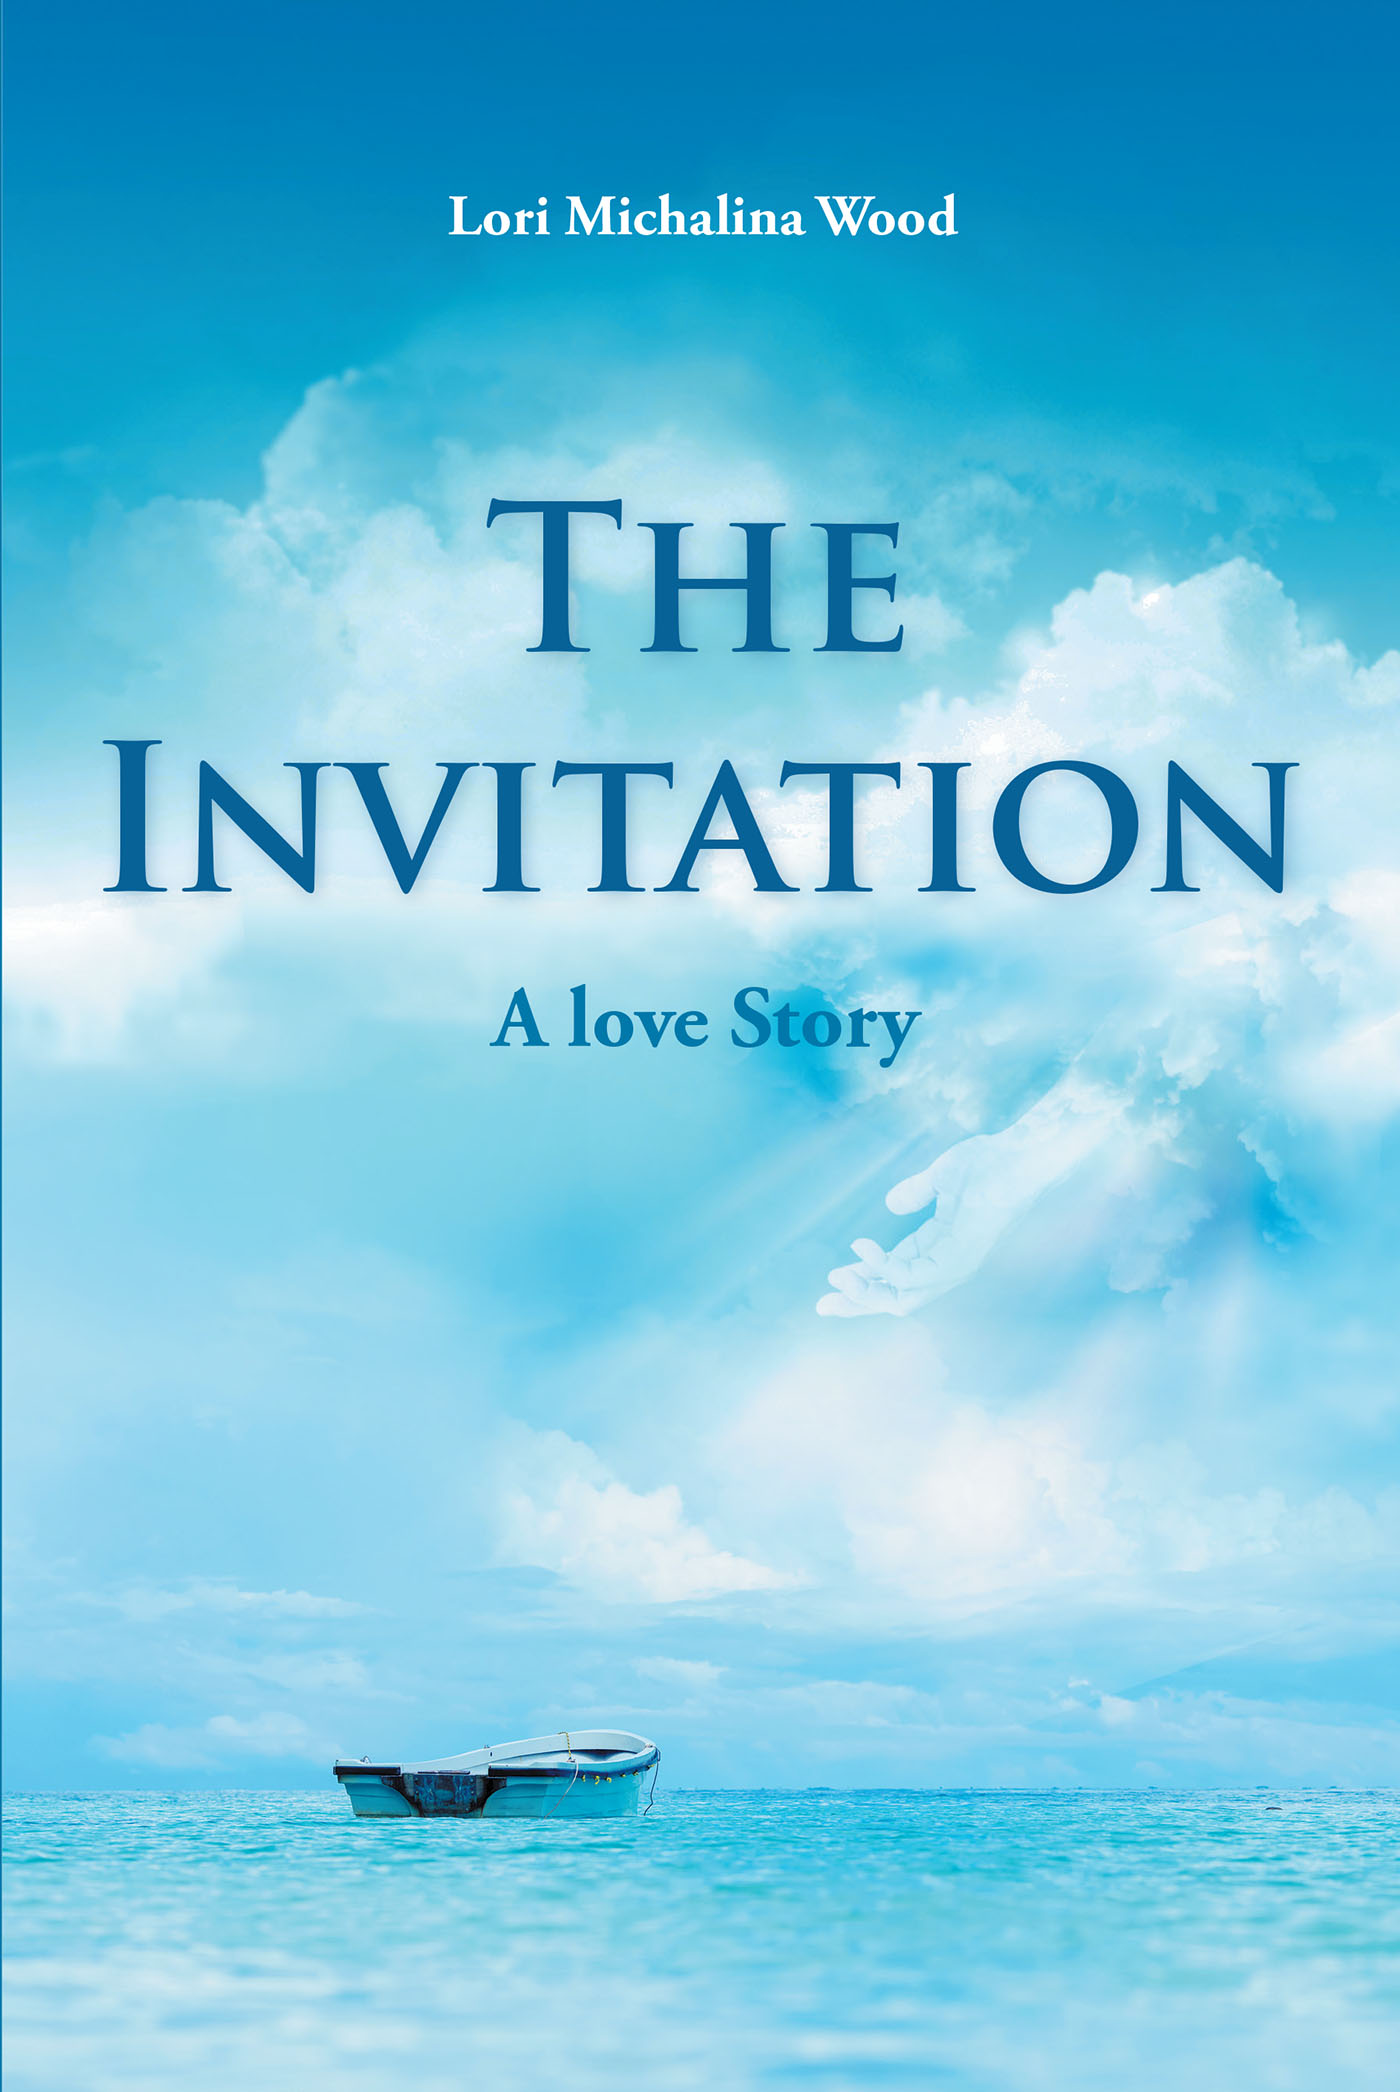 Author Lori Michalina Wood’s New Book, "The Invitation: A Love Story," is an Incredible Faith-Based Read About the Author's Journey with God to Healing and Restoration